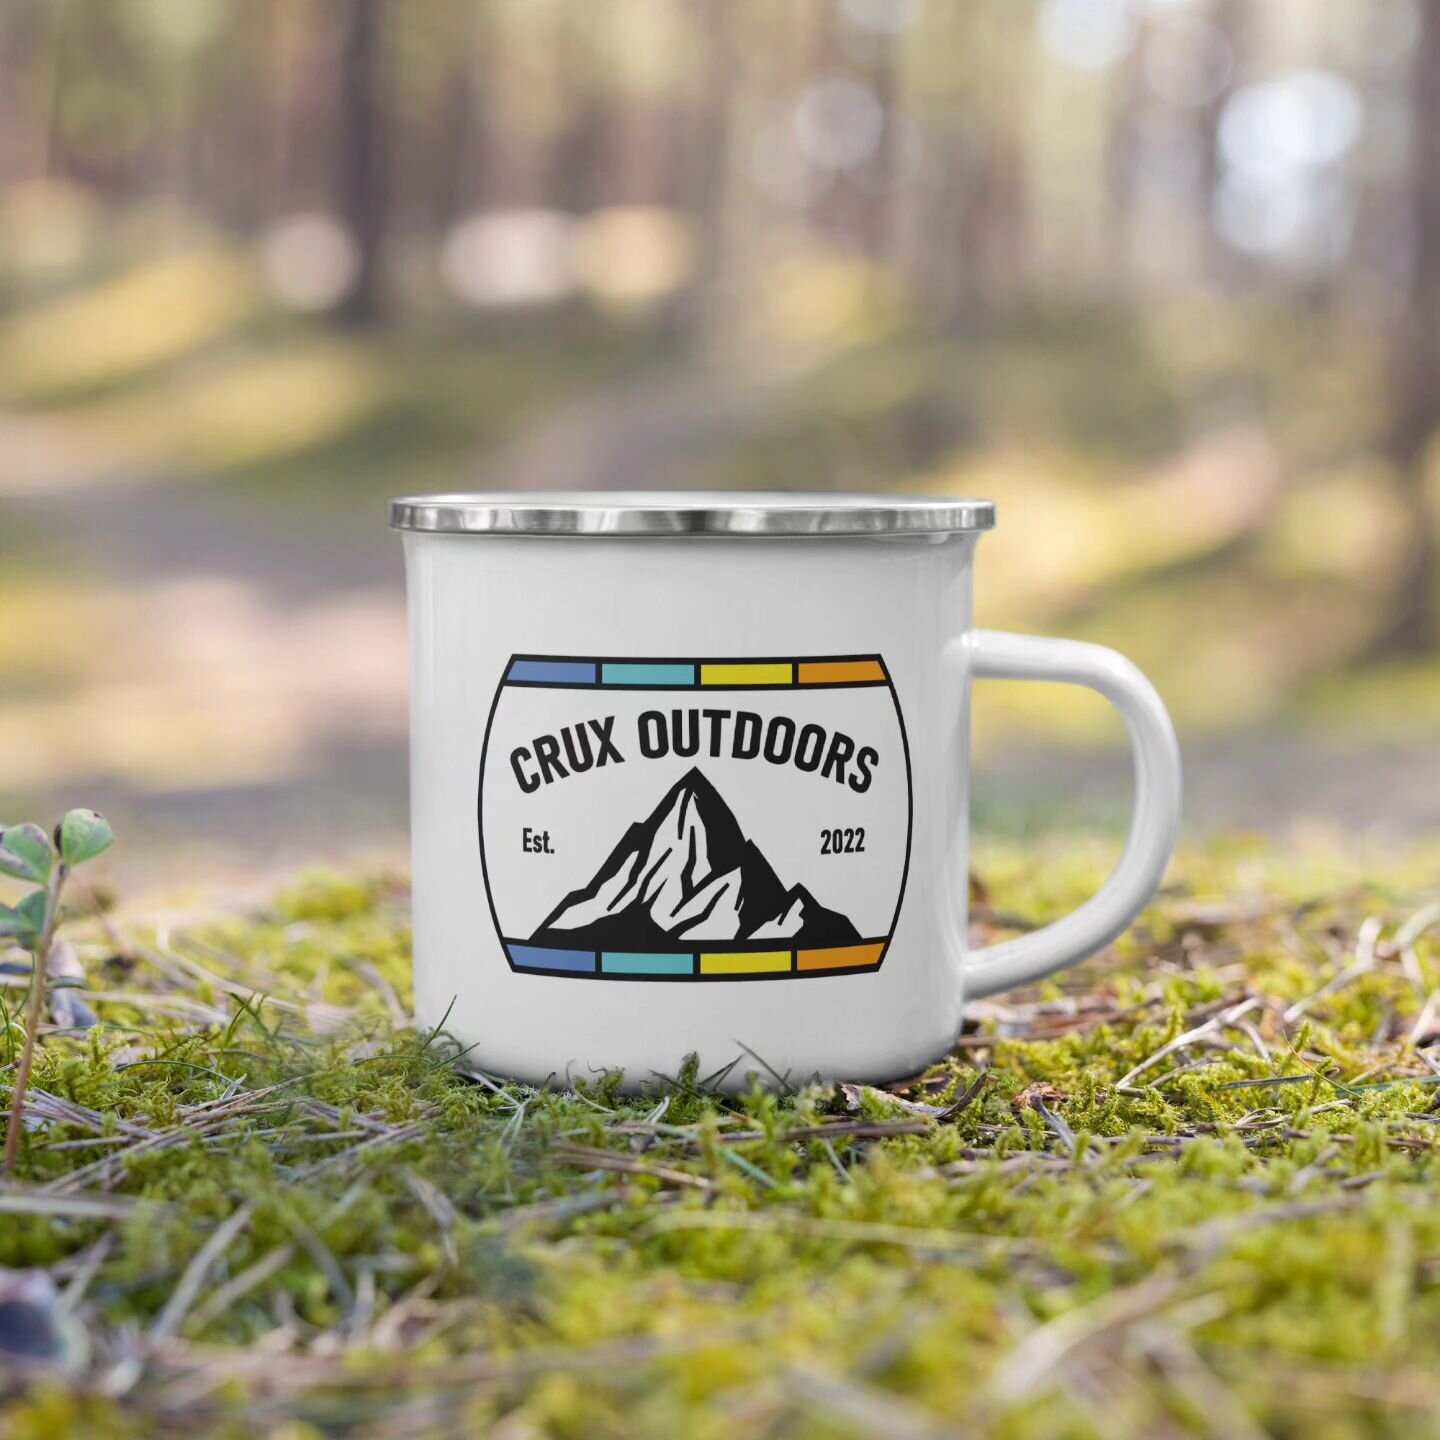 Check out the new additions to the Crux Outdoors shop, sporting a new logo - what do you think?

Shipped in 2 - 3 working days, get yours now at www.crux-outdoors.com/shop